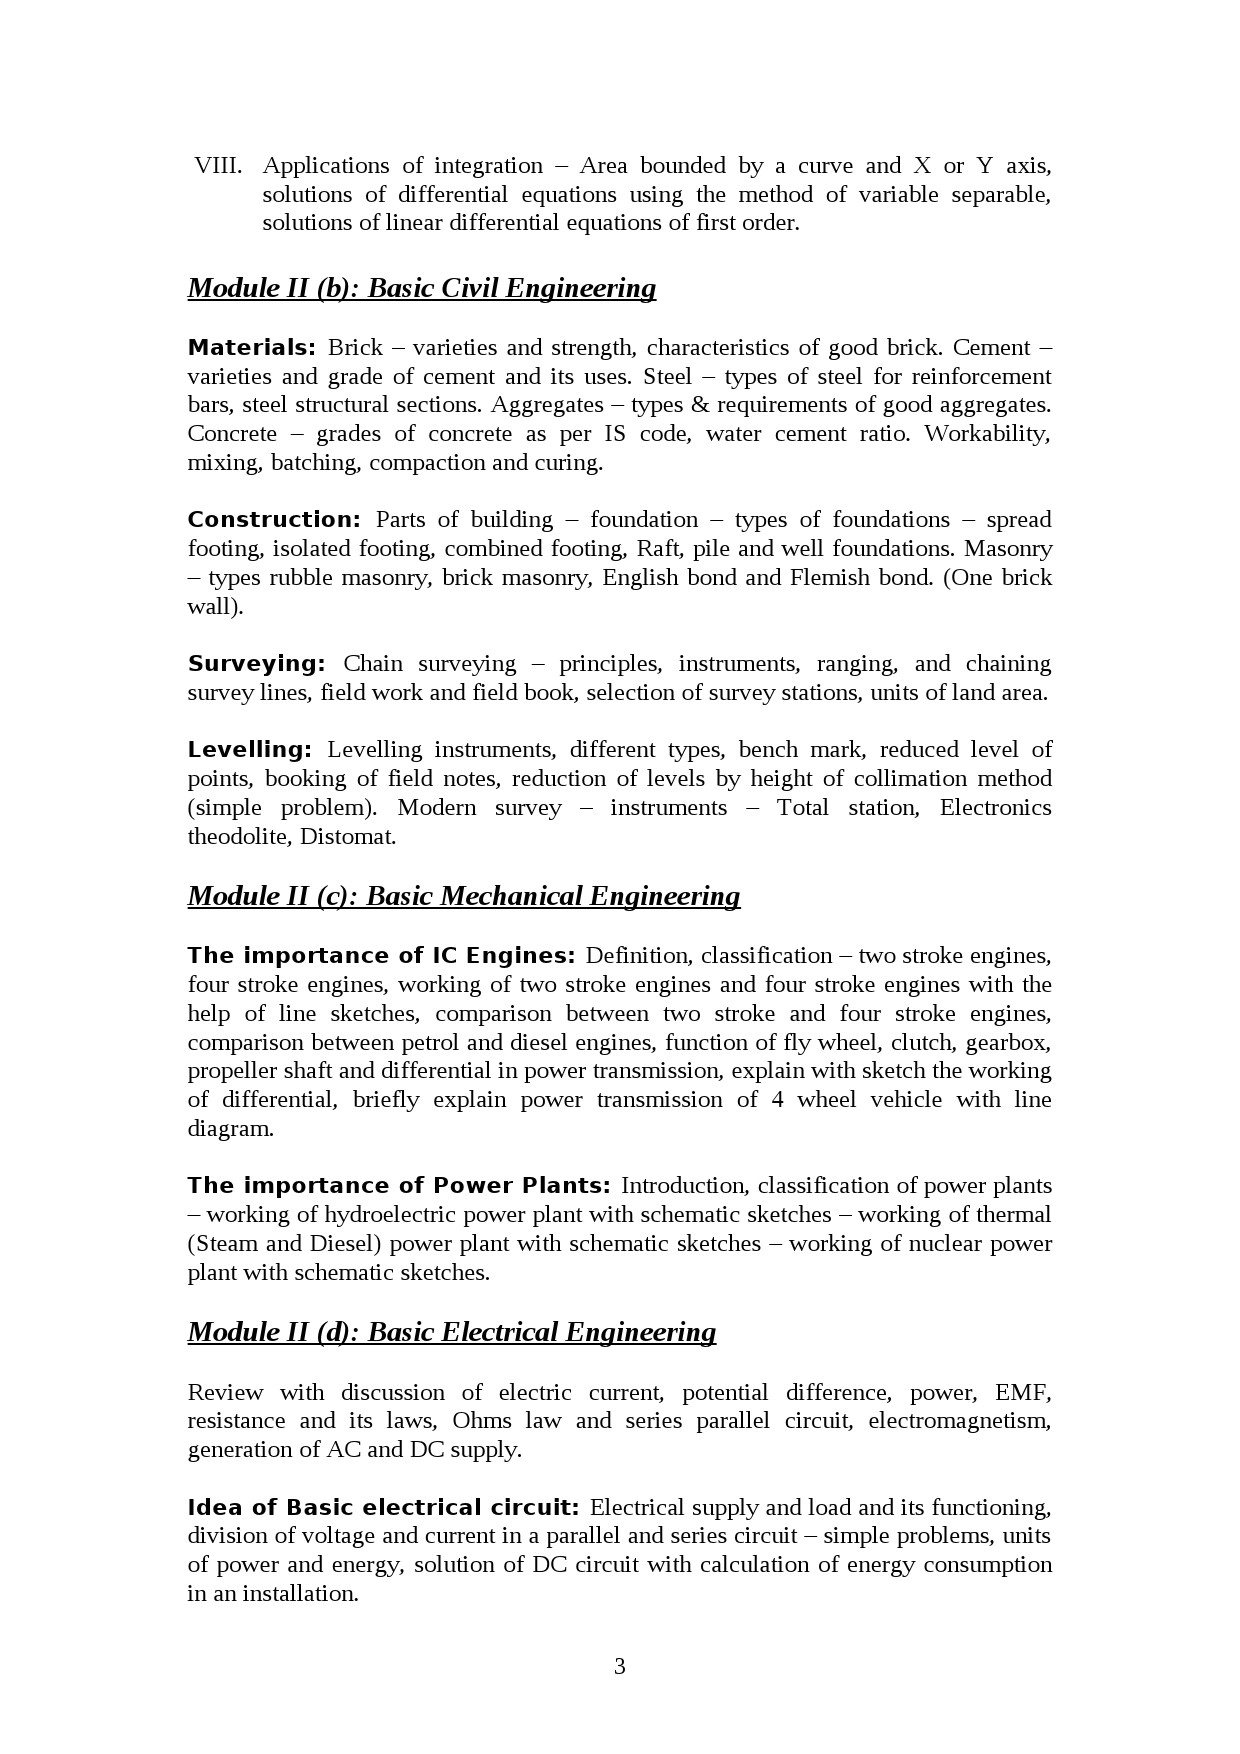 Mechanical Engineering Lecturer in Polytechnic Exam Syllabus - Notification Image 3